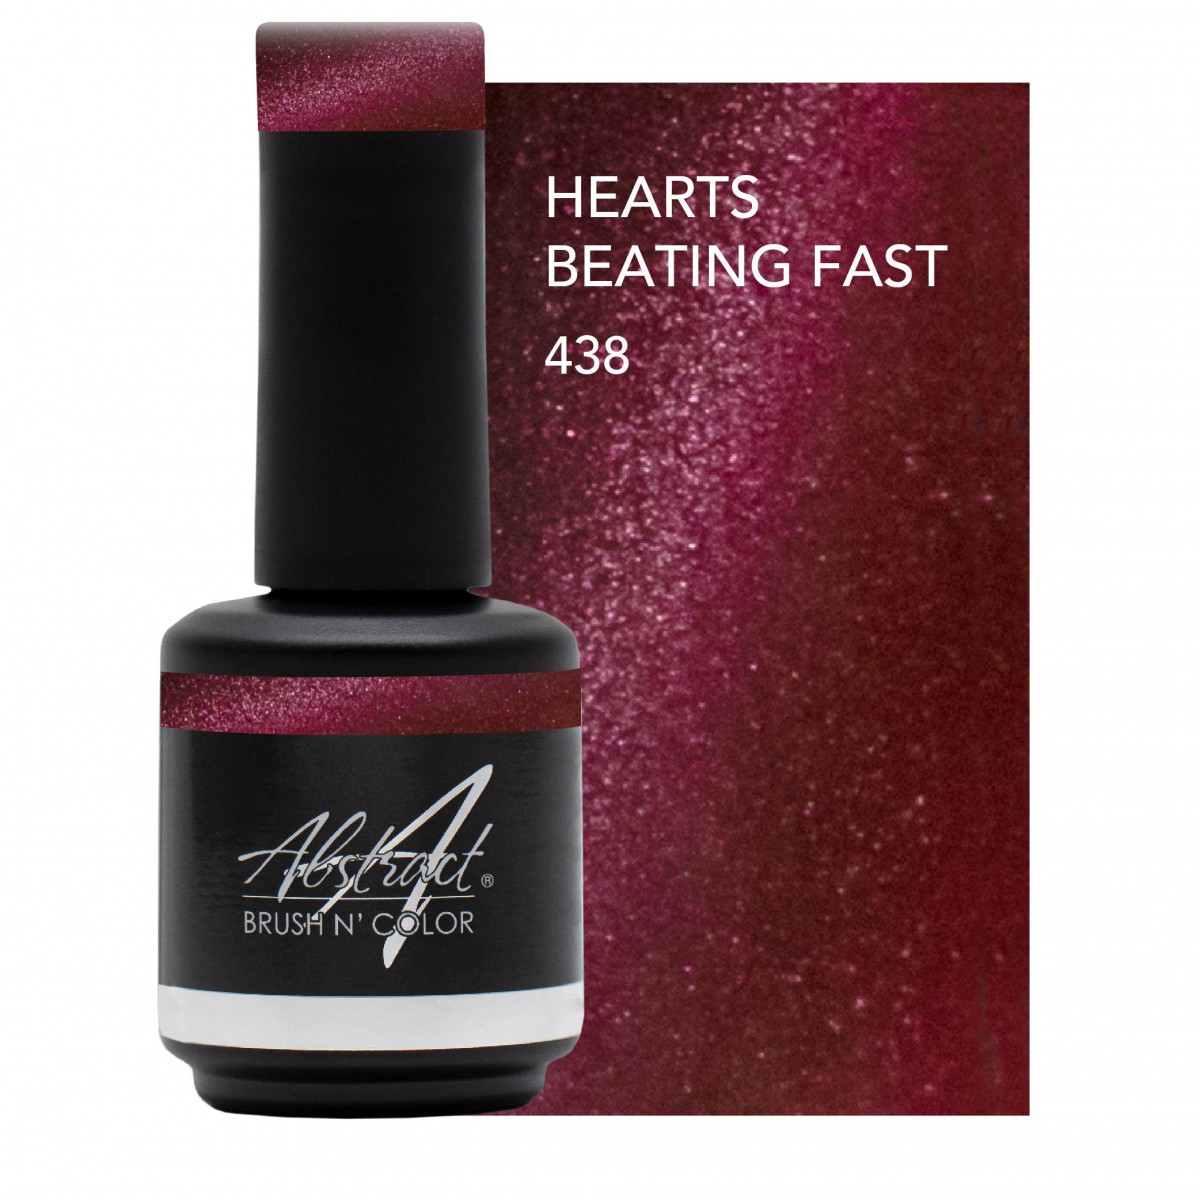 Abstract Hearts Beating Fast 15 ml soft cat-eye